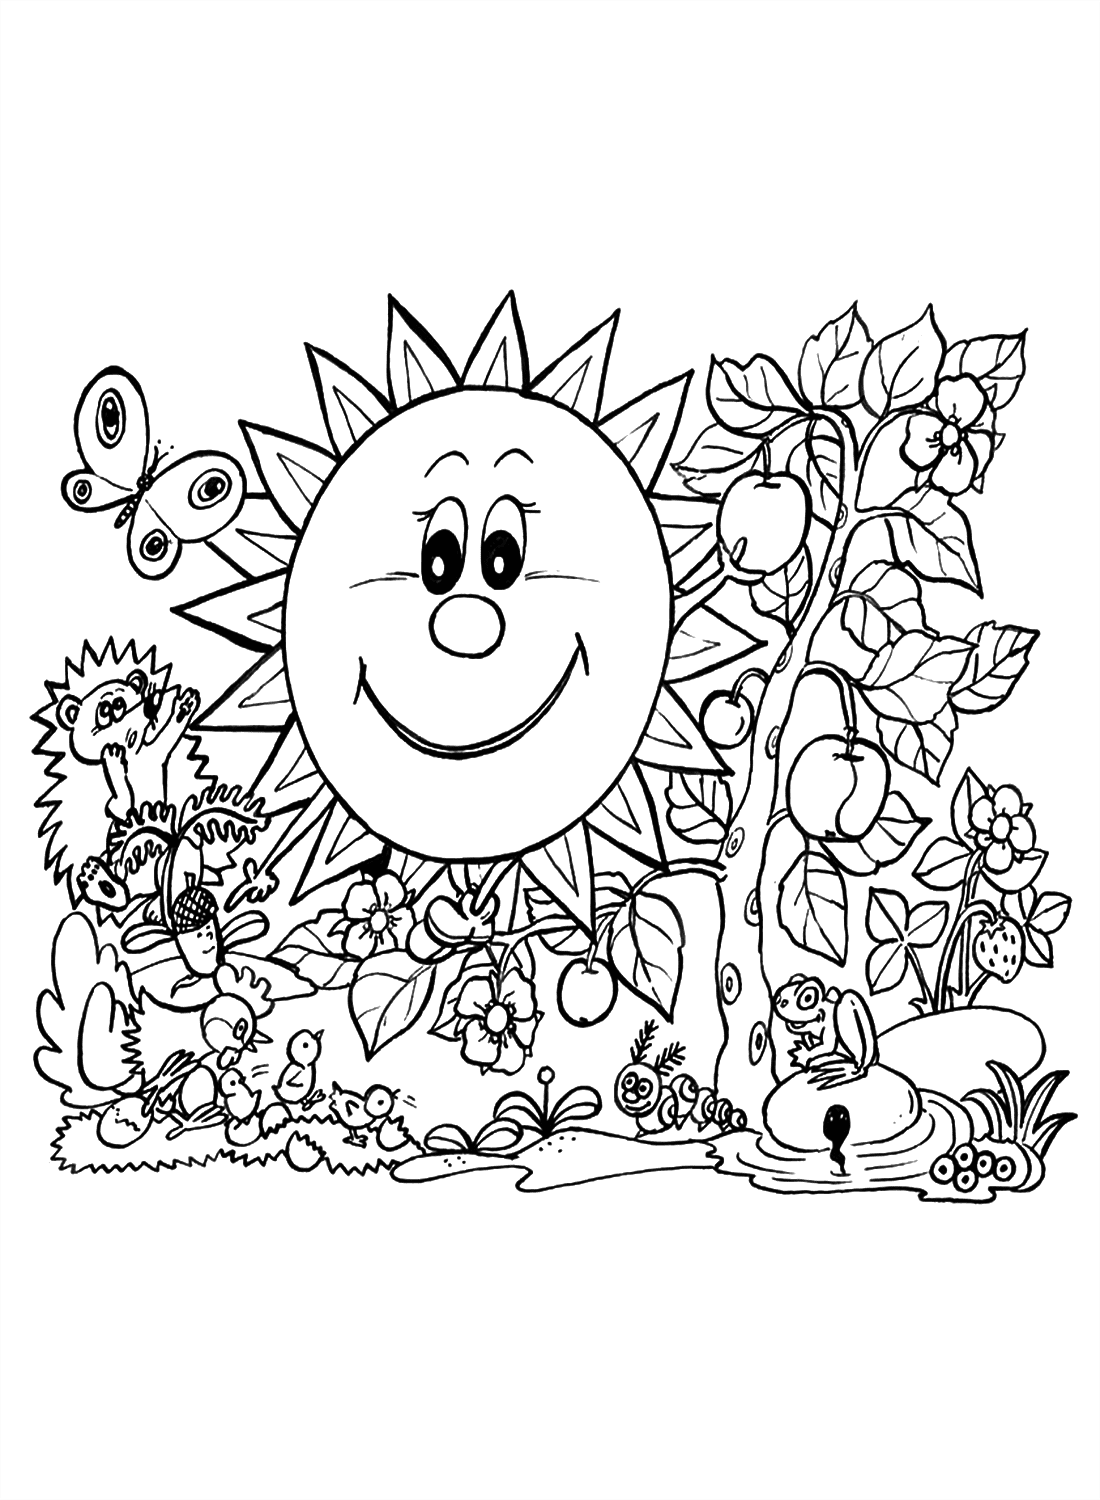 Smiling Sun With Flowers Coloring Pages